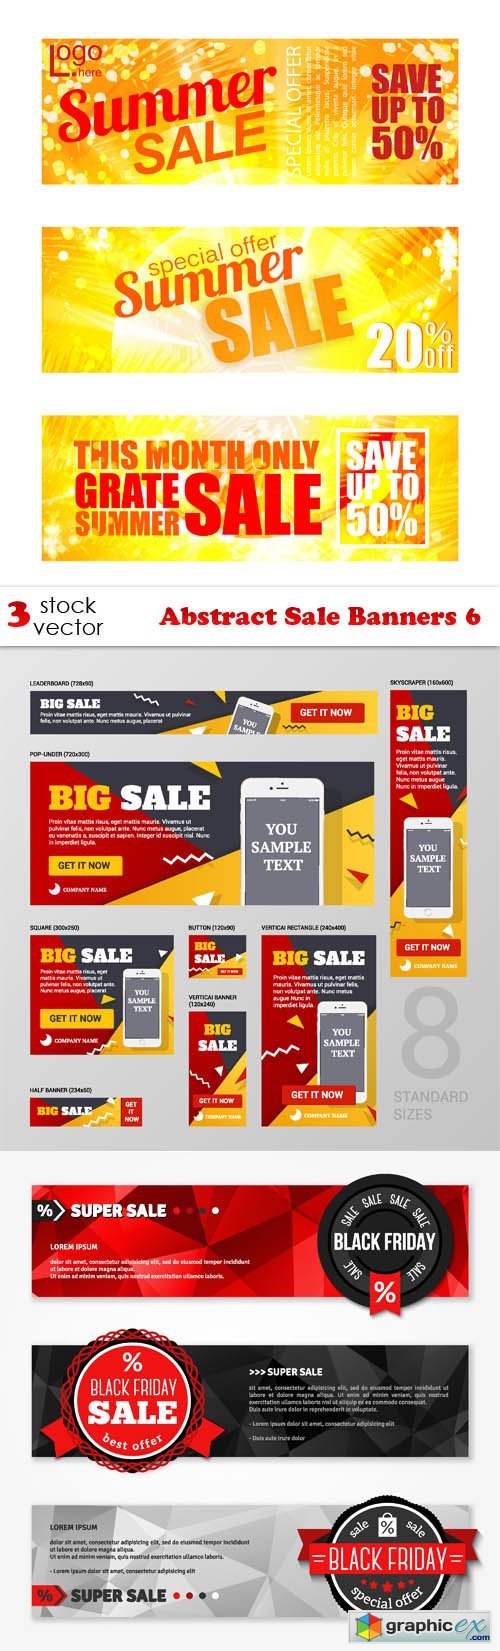 Abstract Sale Banners 6